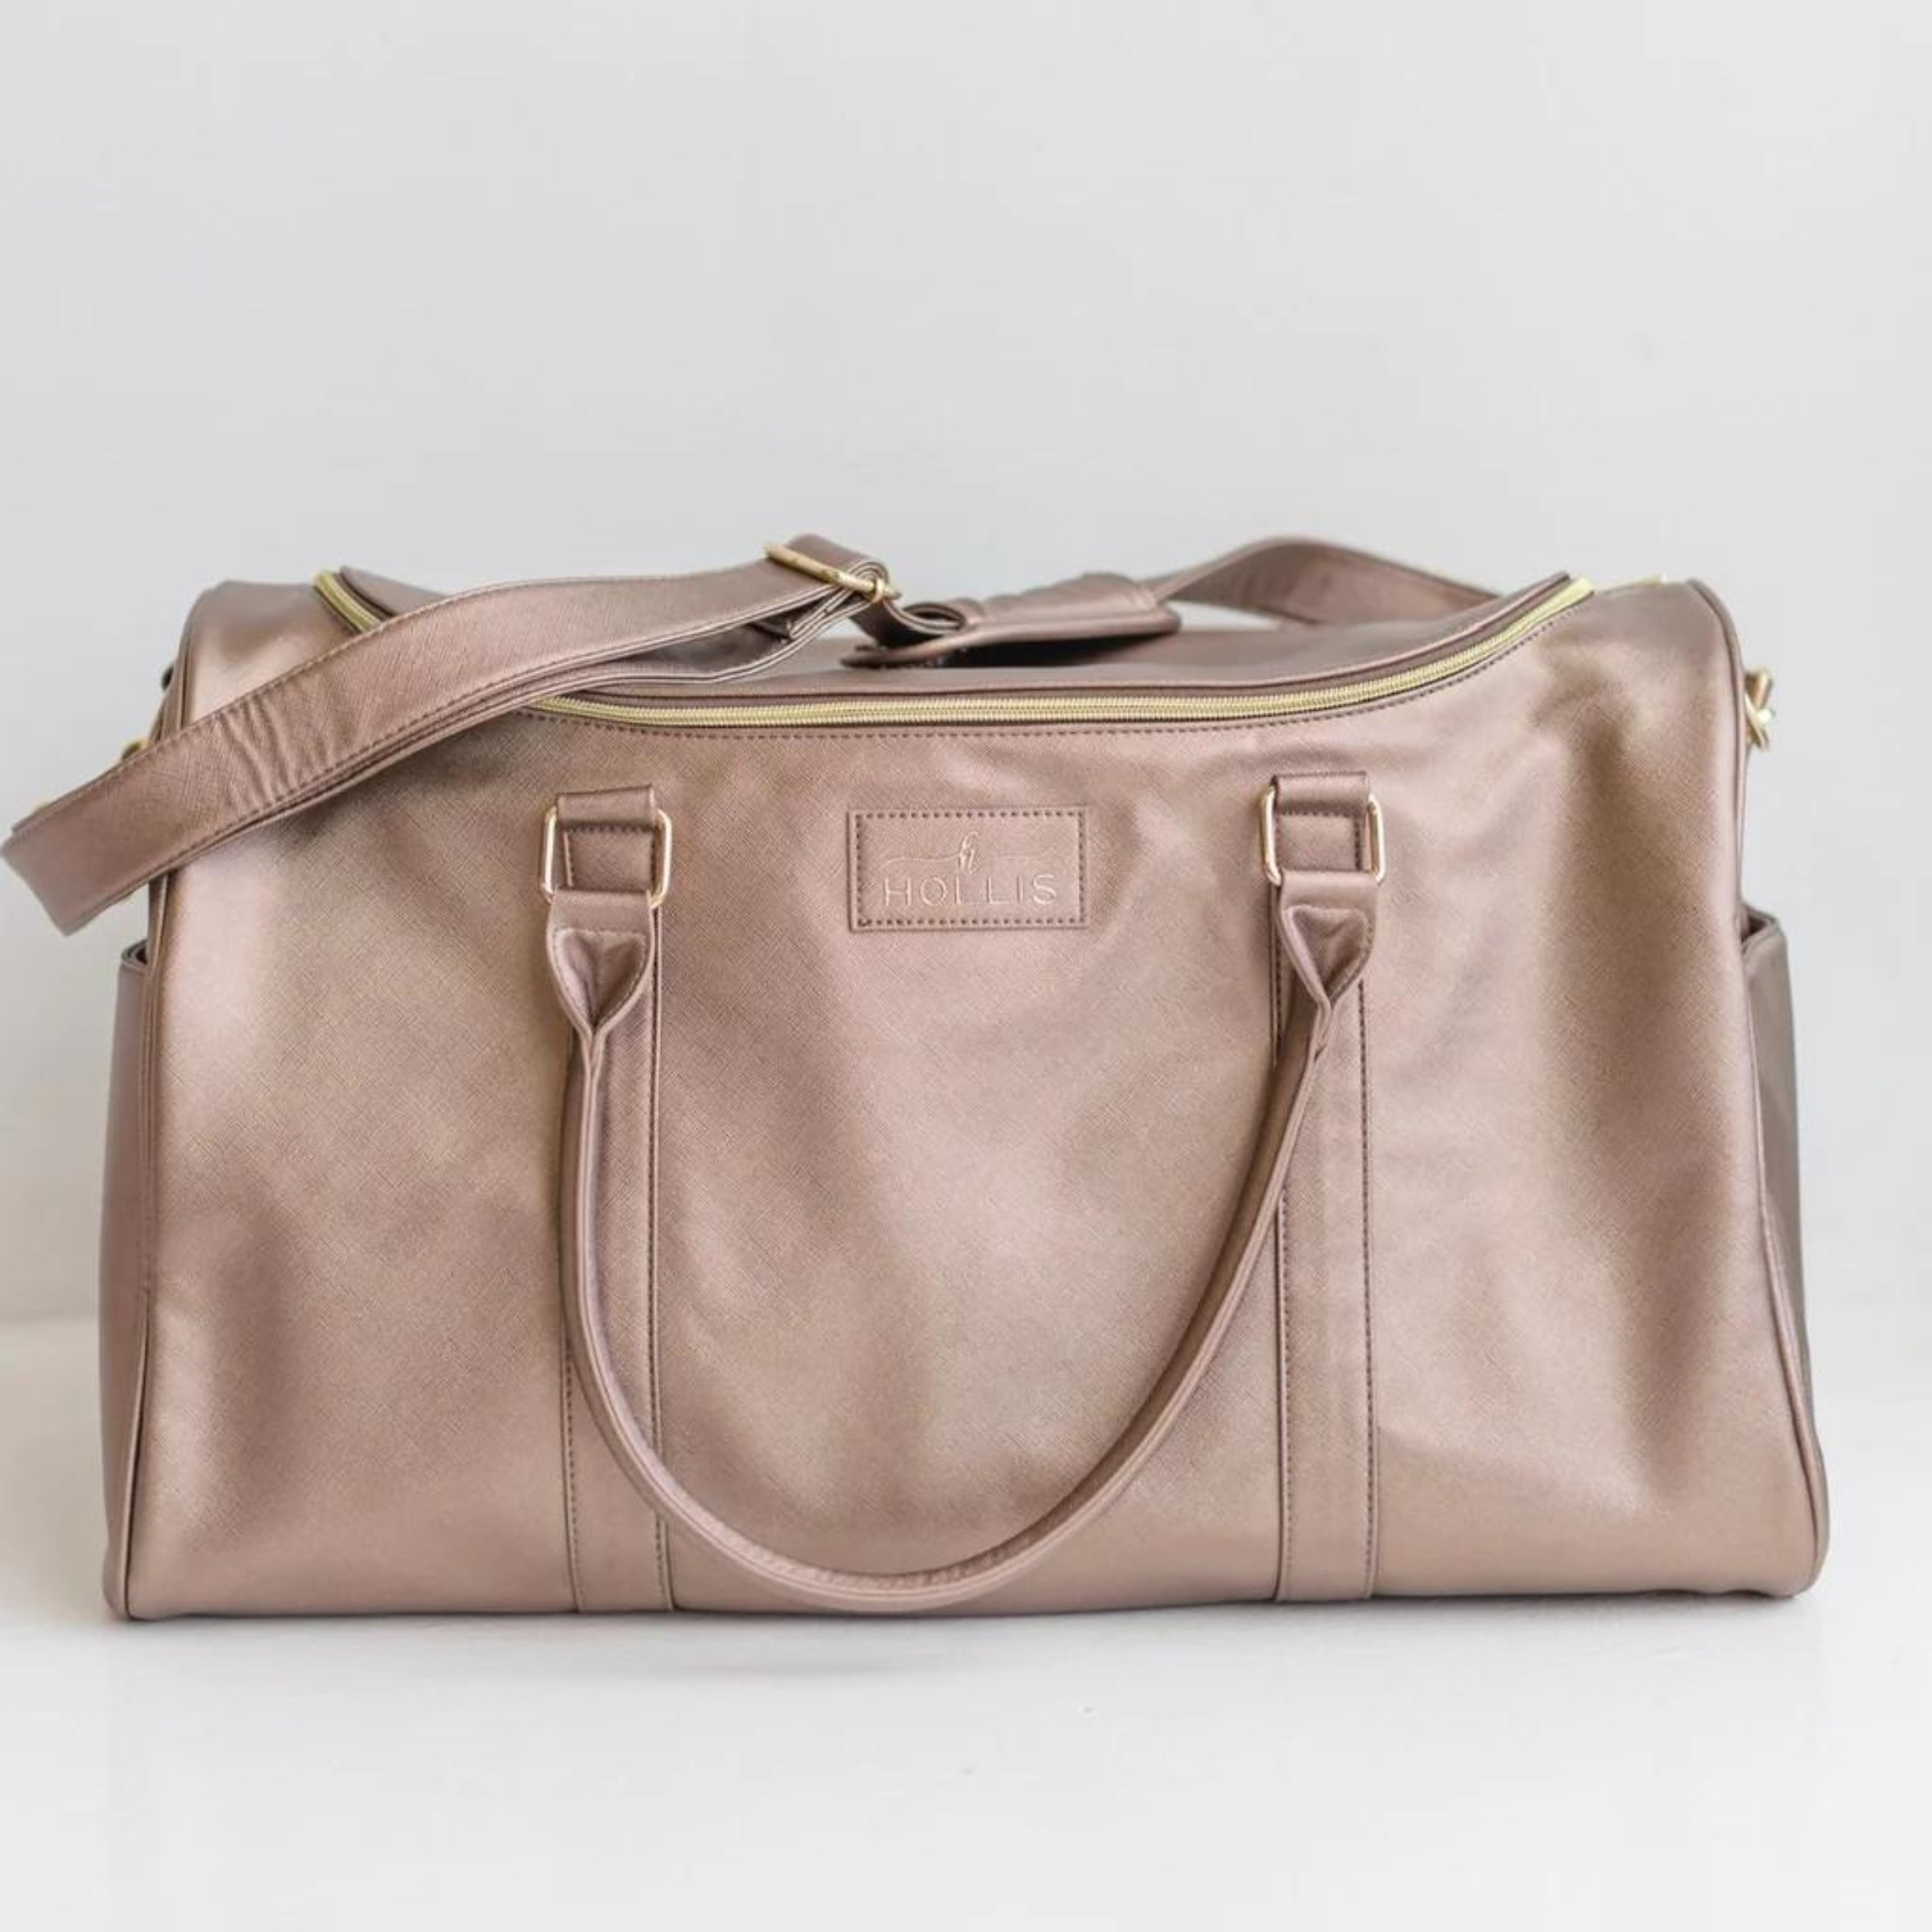 Metallic mocha duffel bag with hot pink handles. This bag has a gold top zipper and pocket on each side. This bag is pictured on a light grey background. 